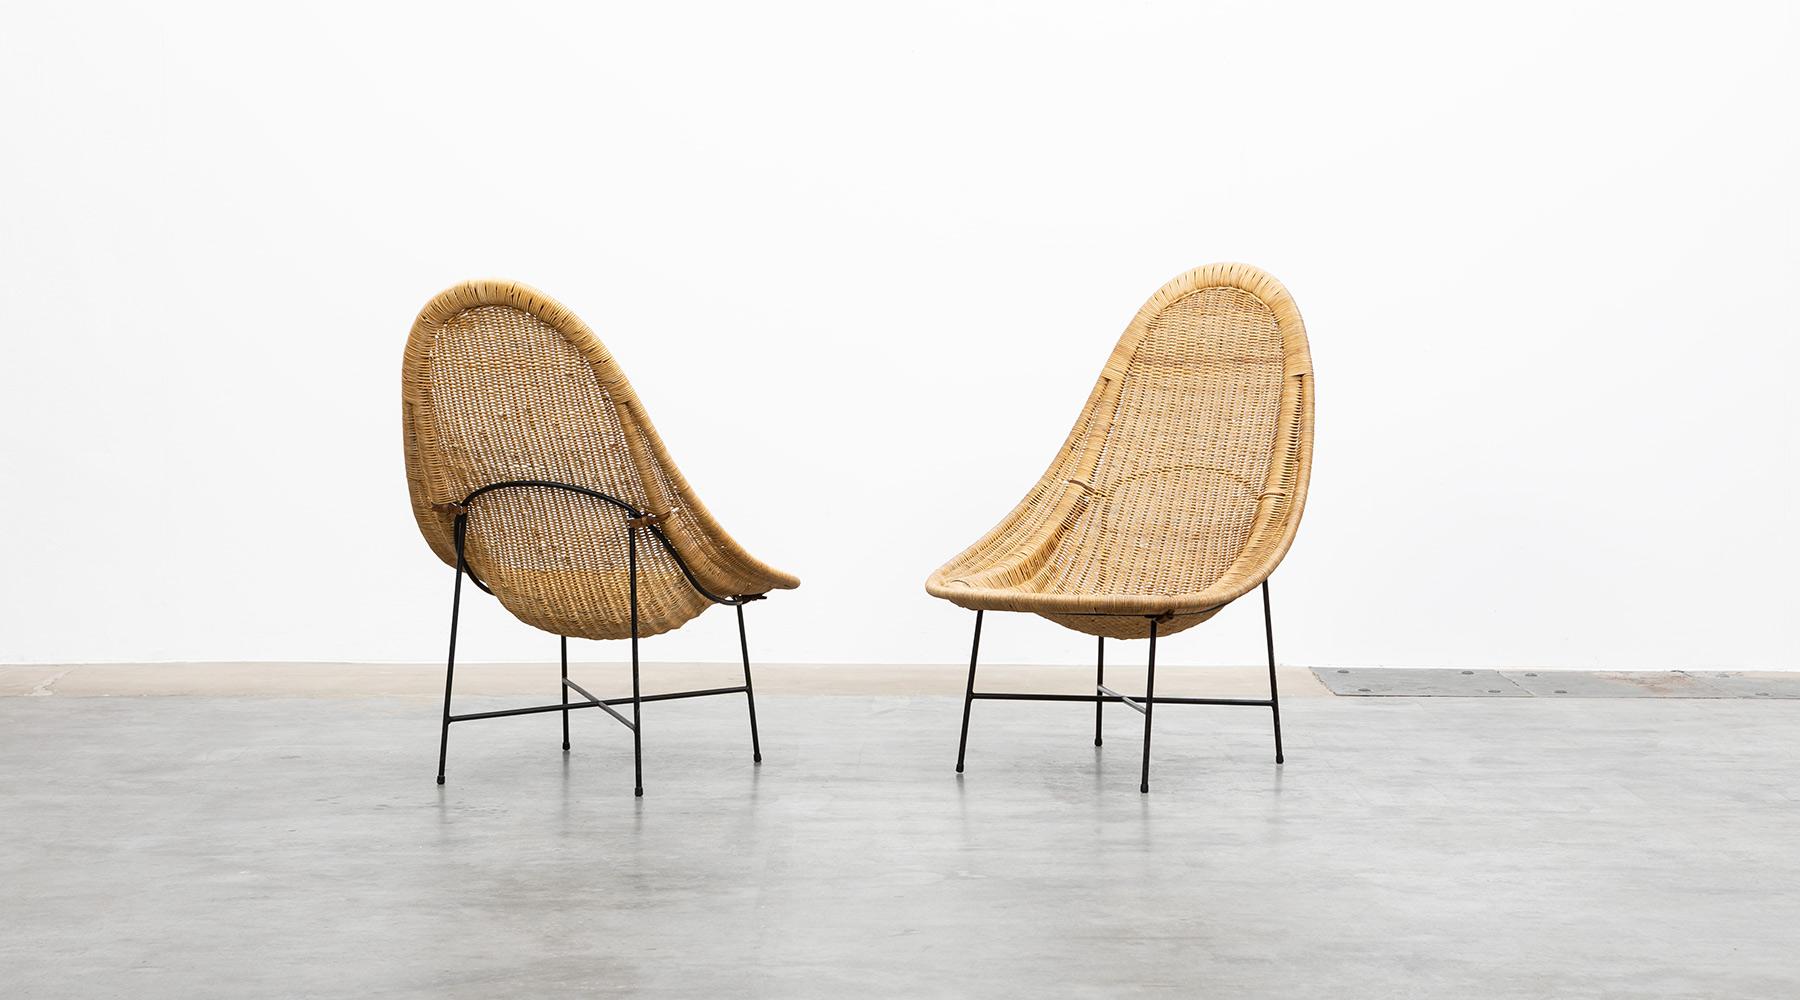 Kerstin Holmquist lounge chairs by Nordiska Kompaniets Verkstäder, Sweden, 1950.

The beautifully crafted basket shells lies elegantly on the black lacquered metal frame, held in place only by two leather straps at the back side. The seating